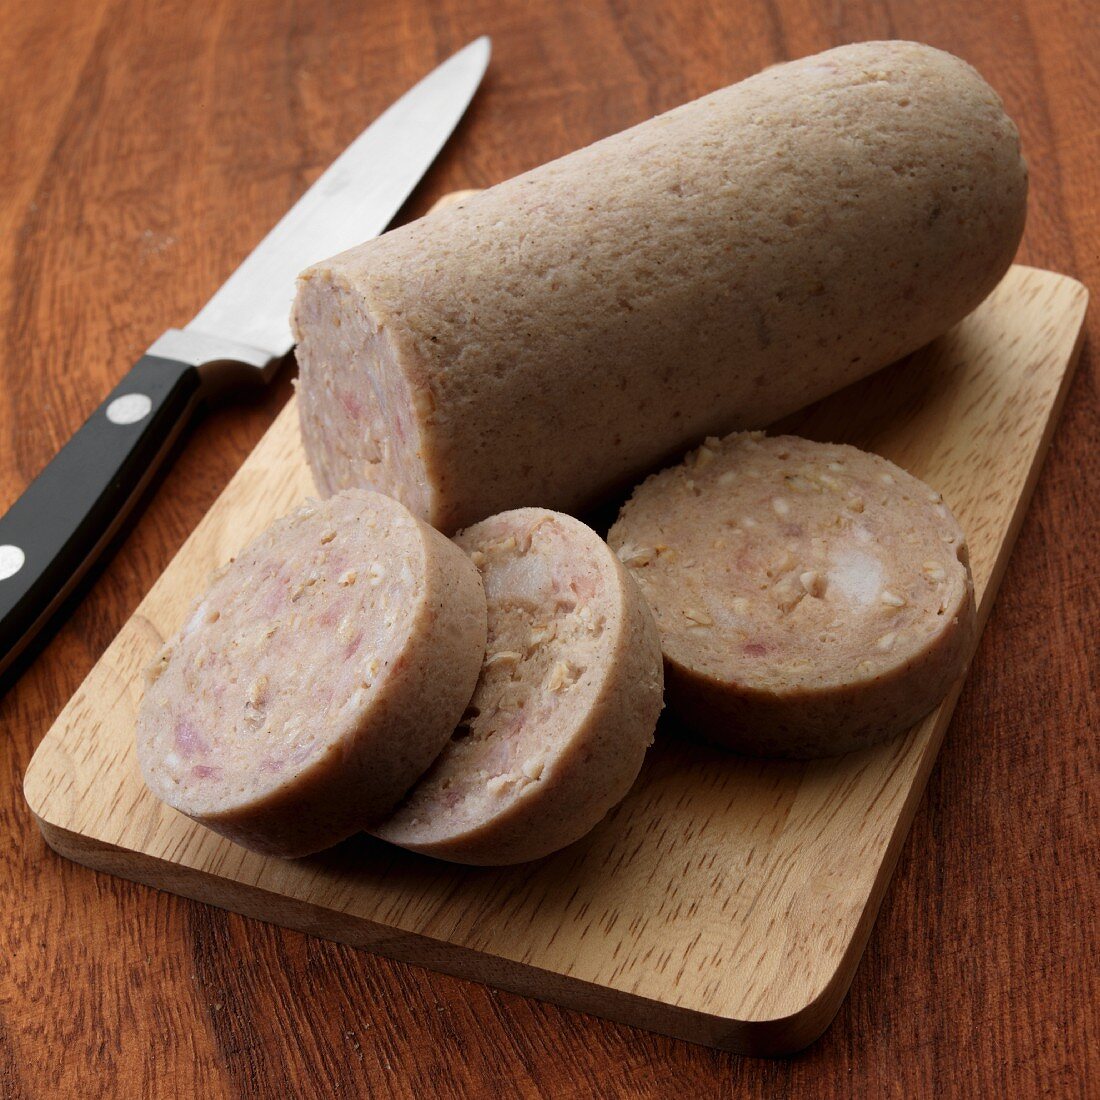 Uncooked English white pudding on cutting board with knife